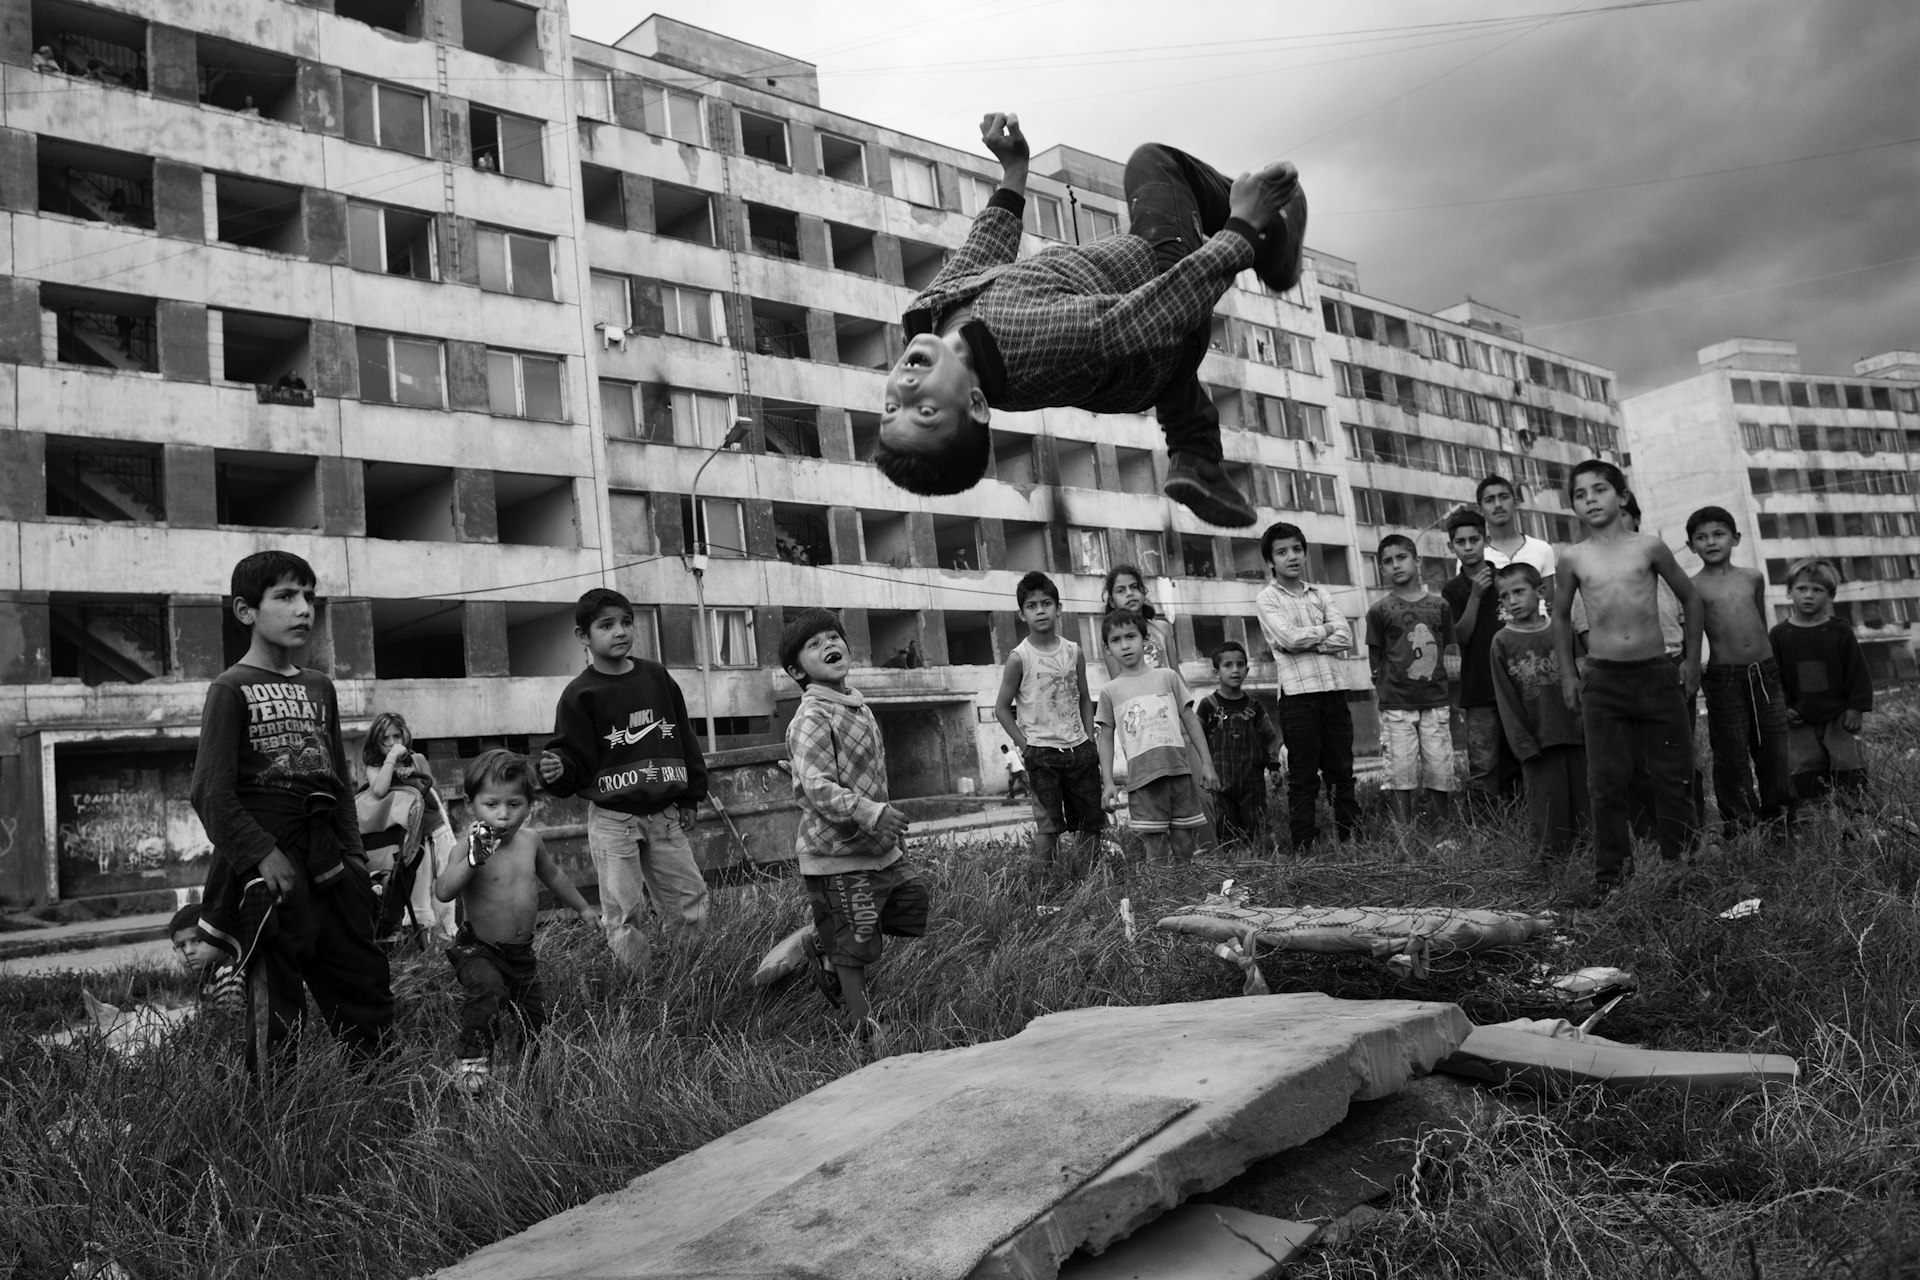 Documenting the plight of the Roma people across Europe